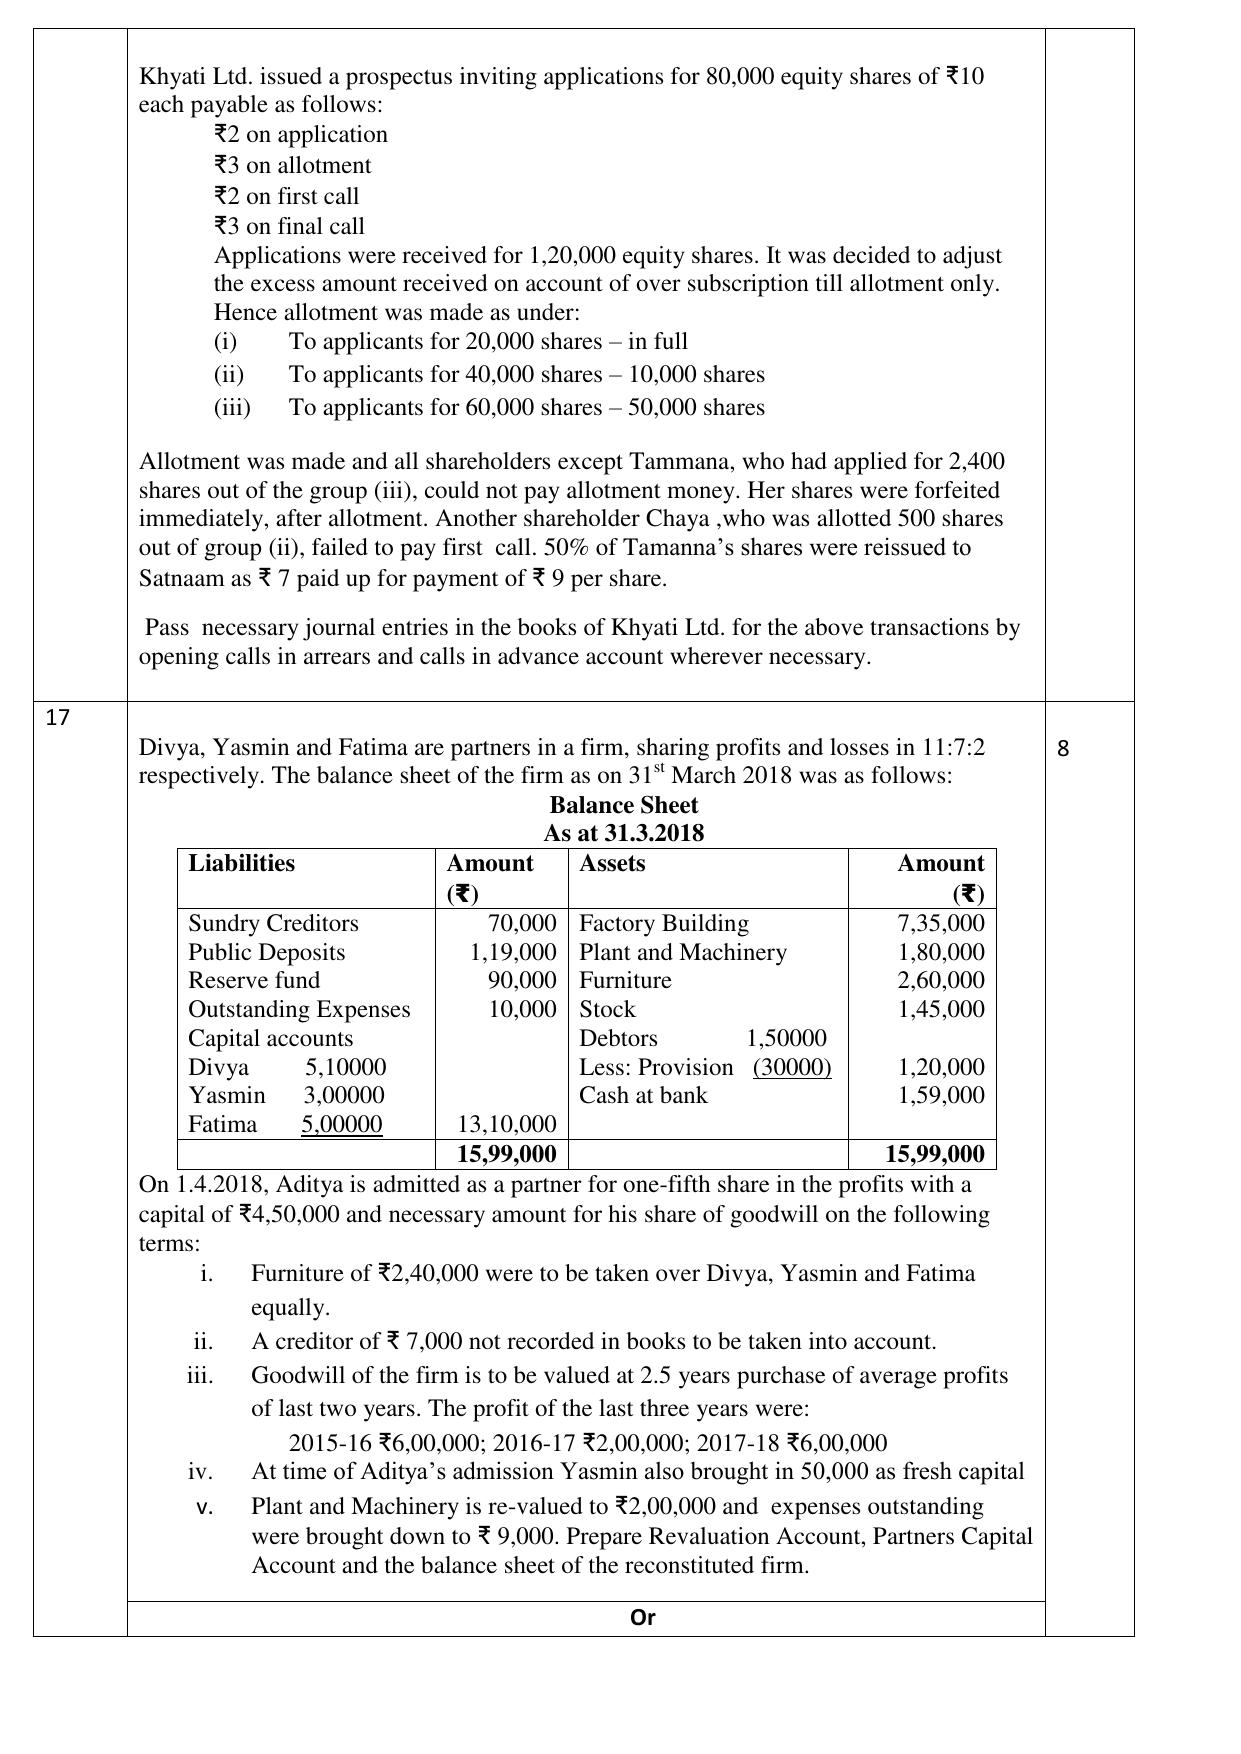 CBSE Class 12 Accountancy-Sample Paper 2018-19 - Page 6